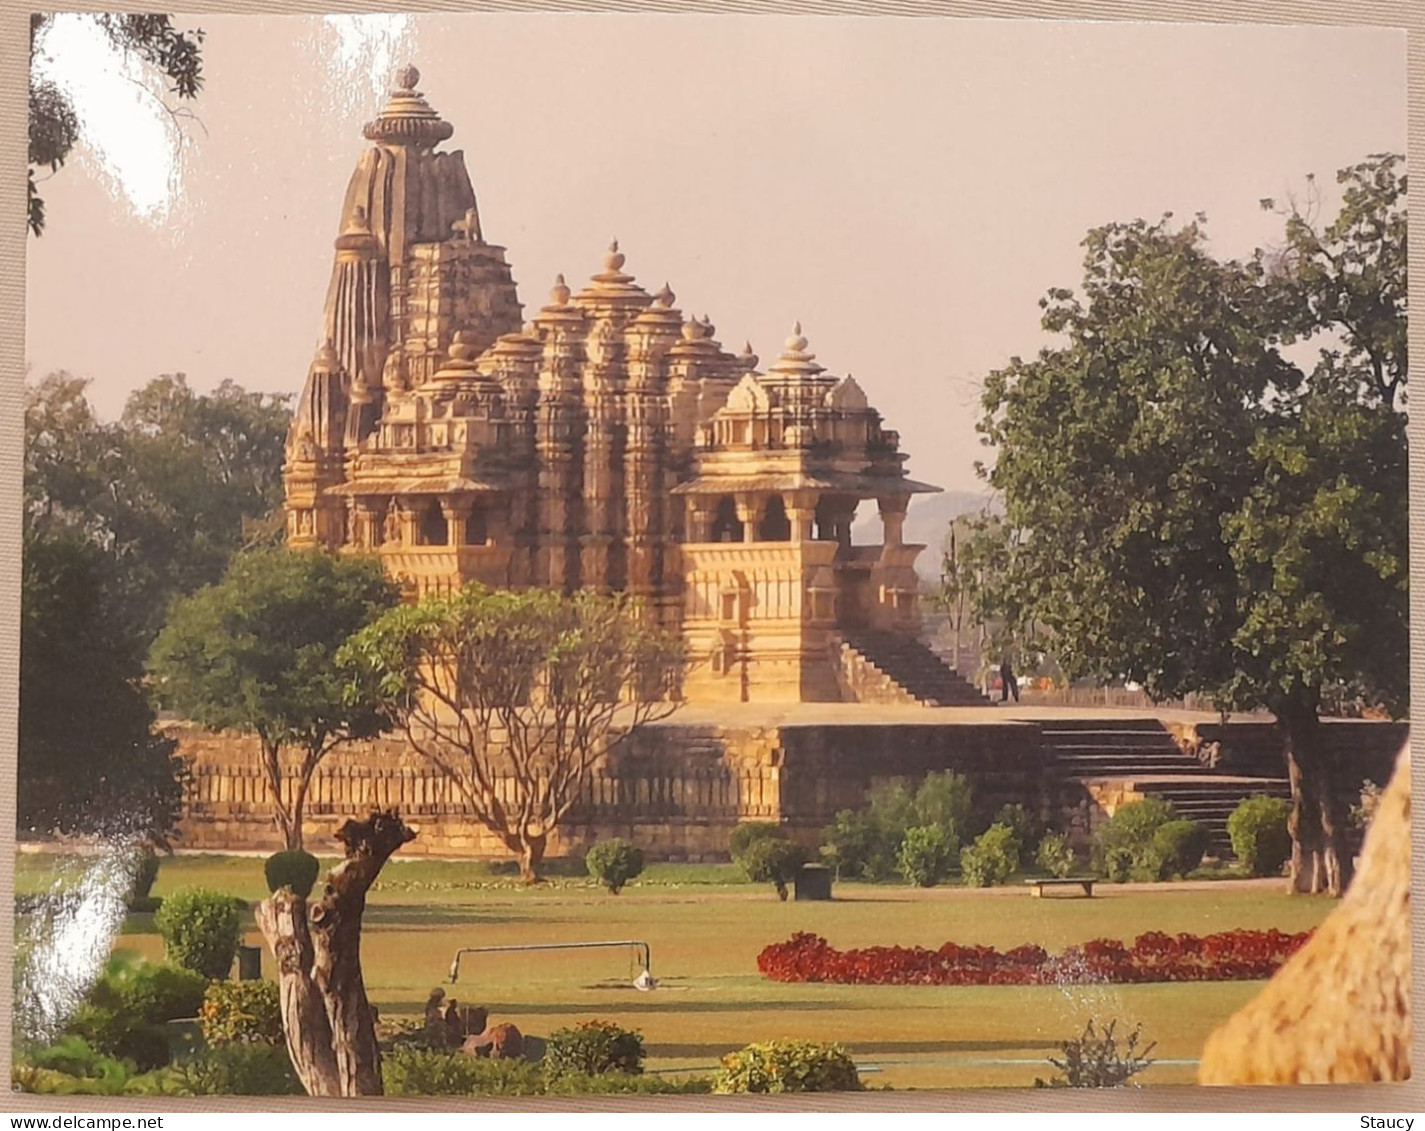 INDIA 1986 UNESCO World Heritage "KHAJURAHO" By B Wilpon Picture Post Card PSB As Per Scan - Induismo